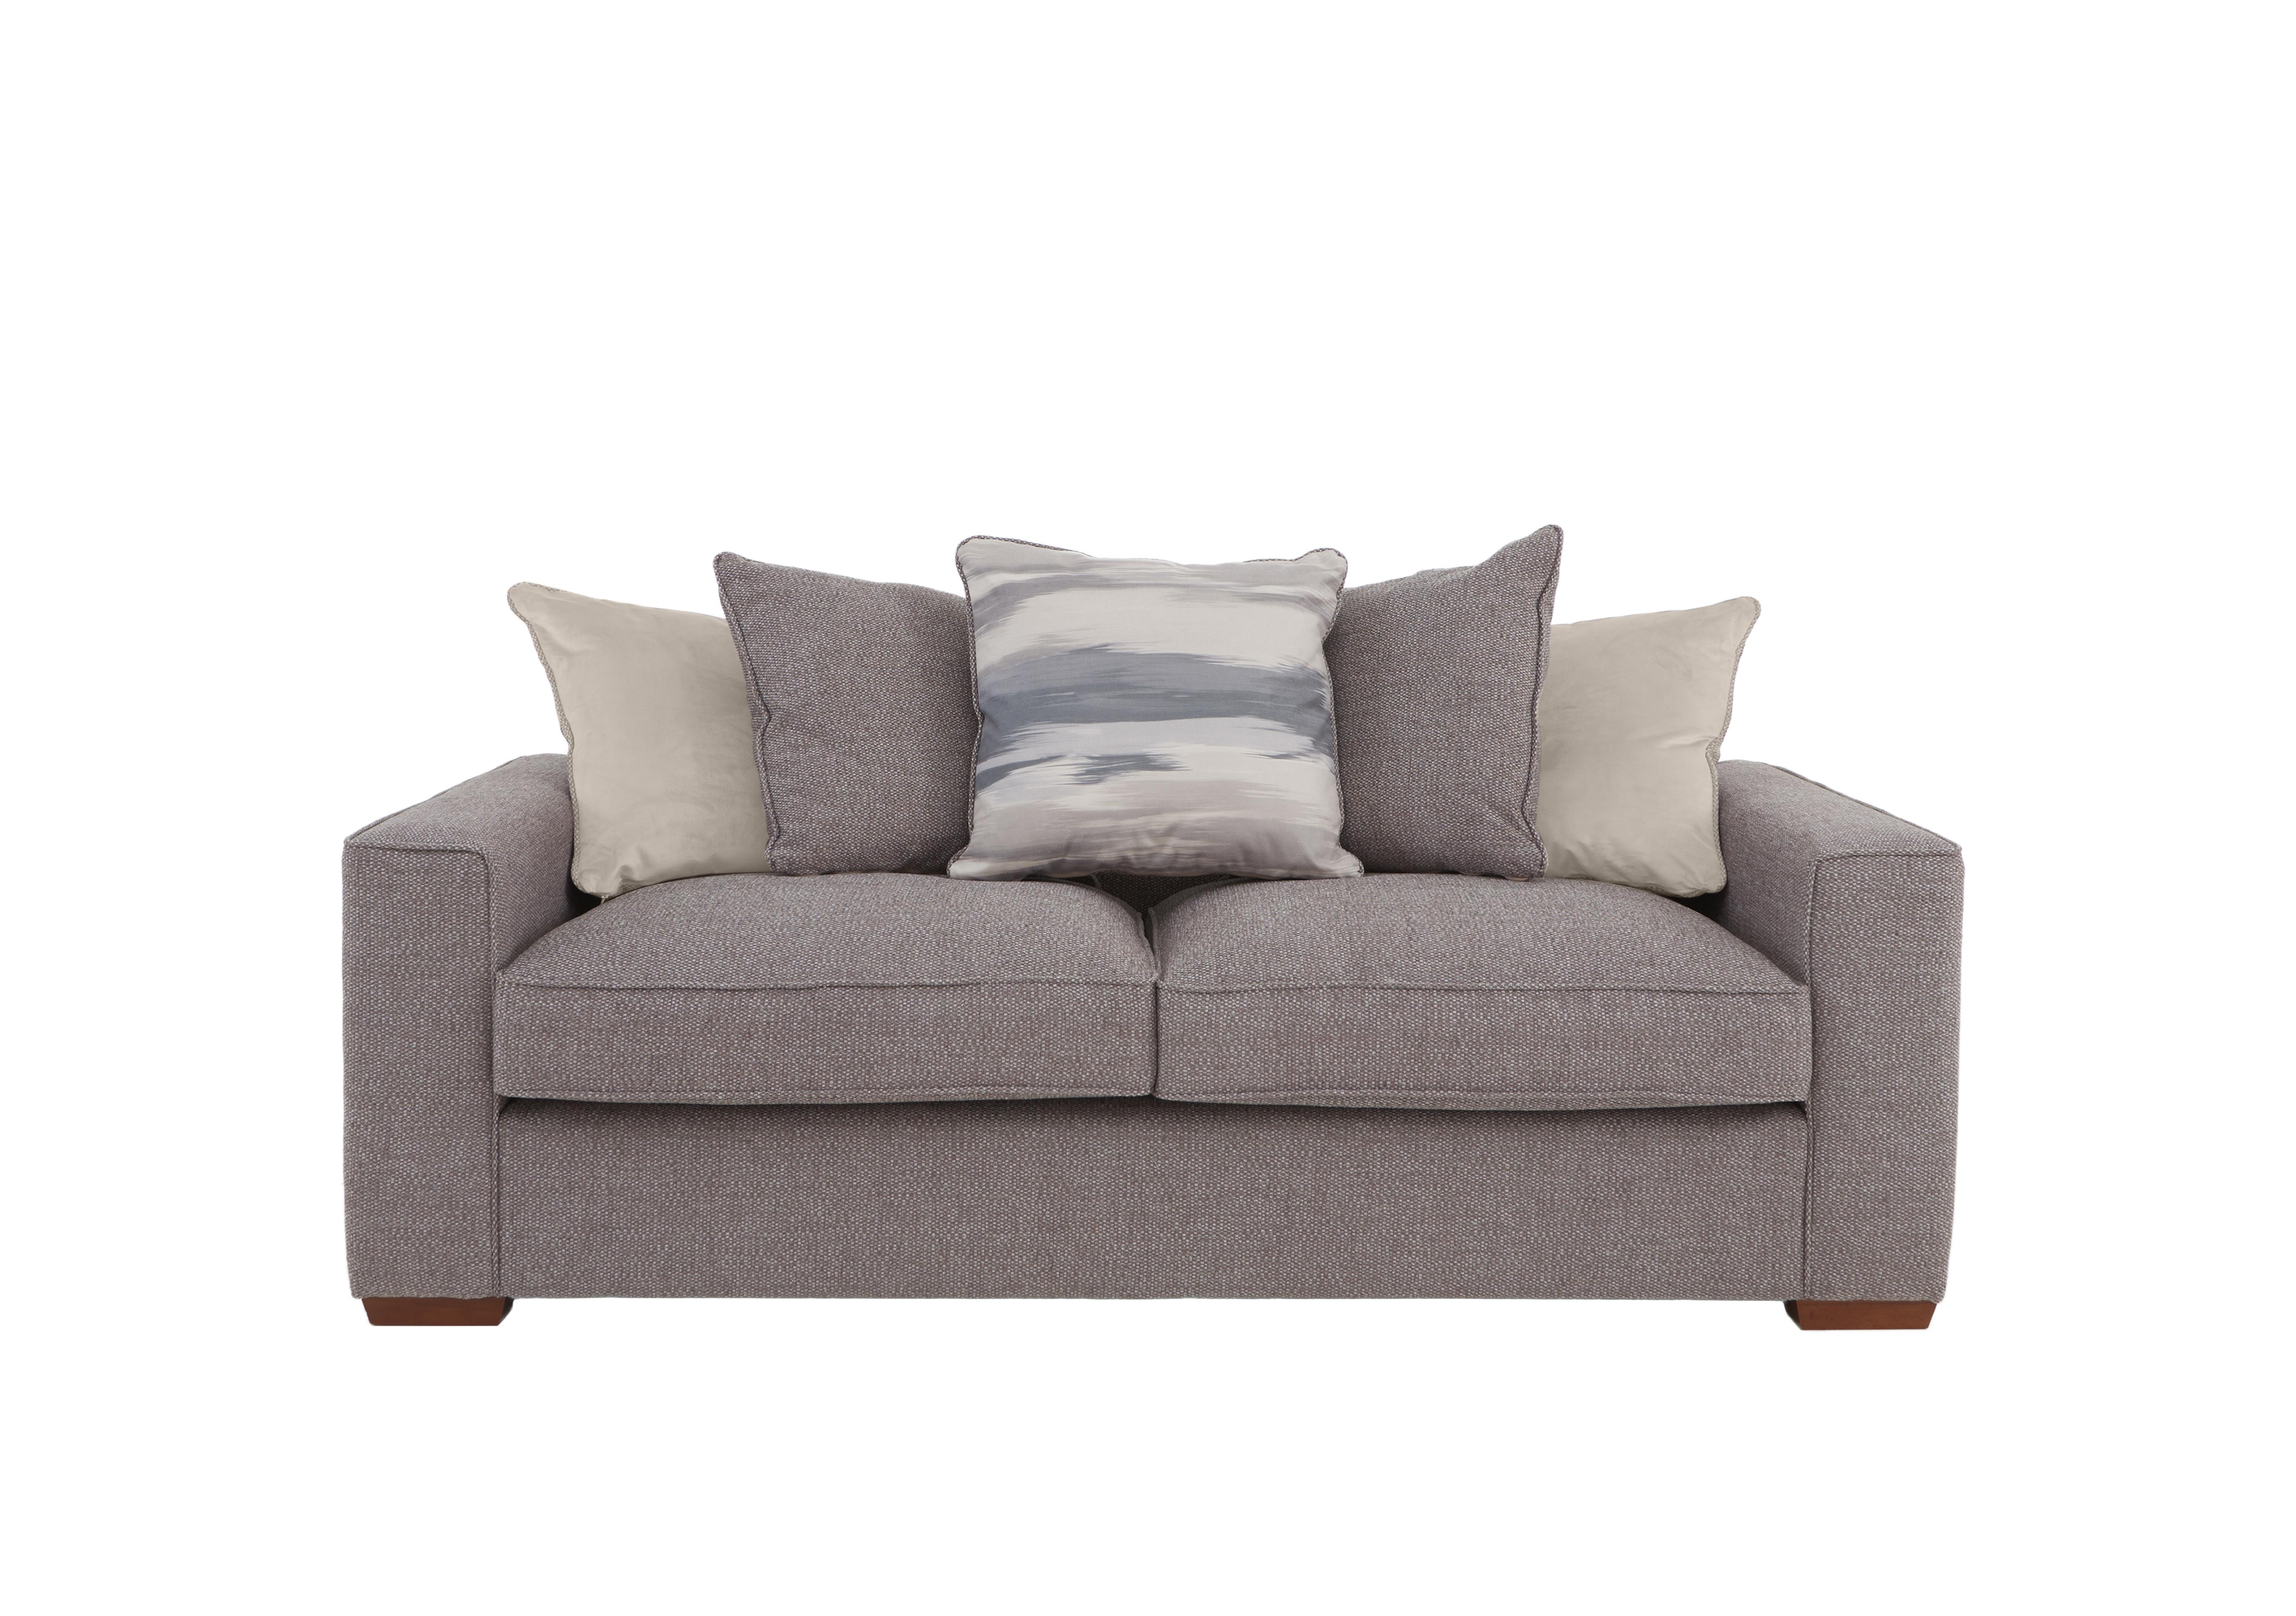 Cory 3 Seater Fabric Scatter Back Sofa Bed in Dallas Taupe Taupe Pack on Furniture Village